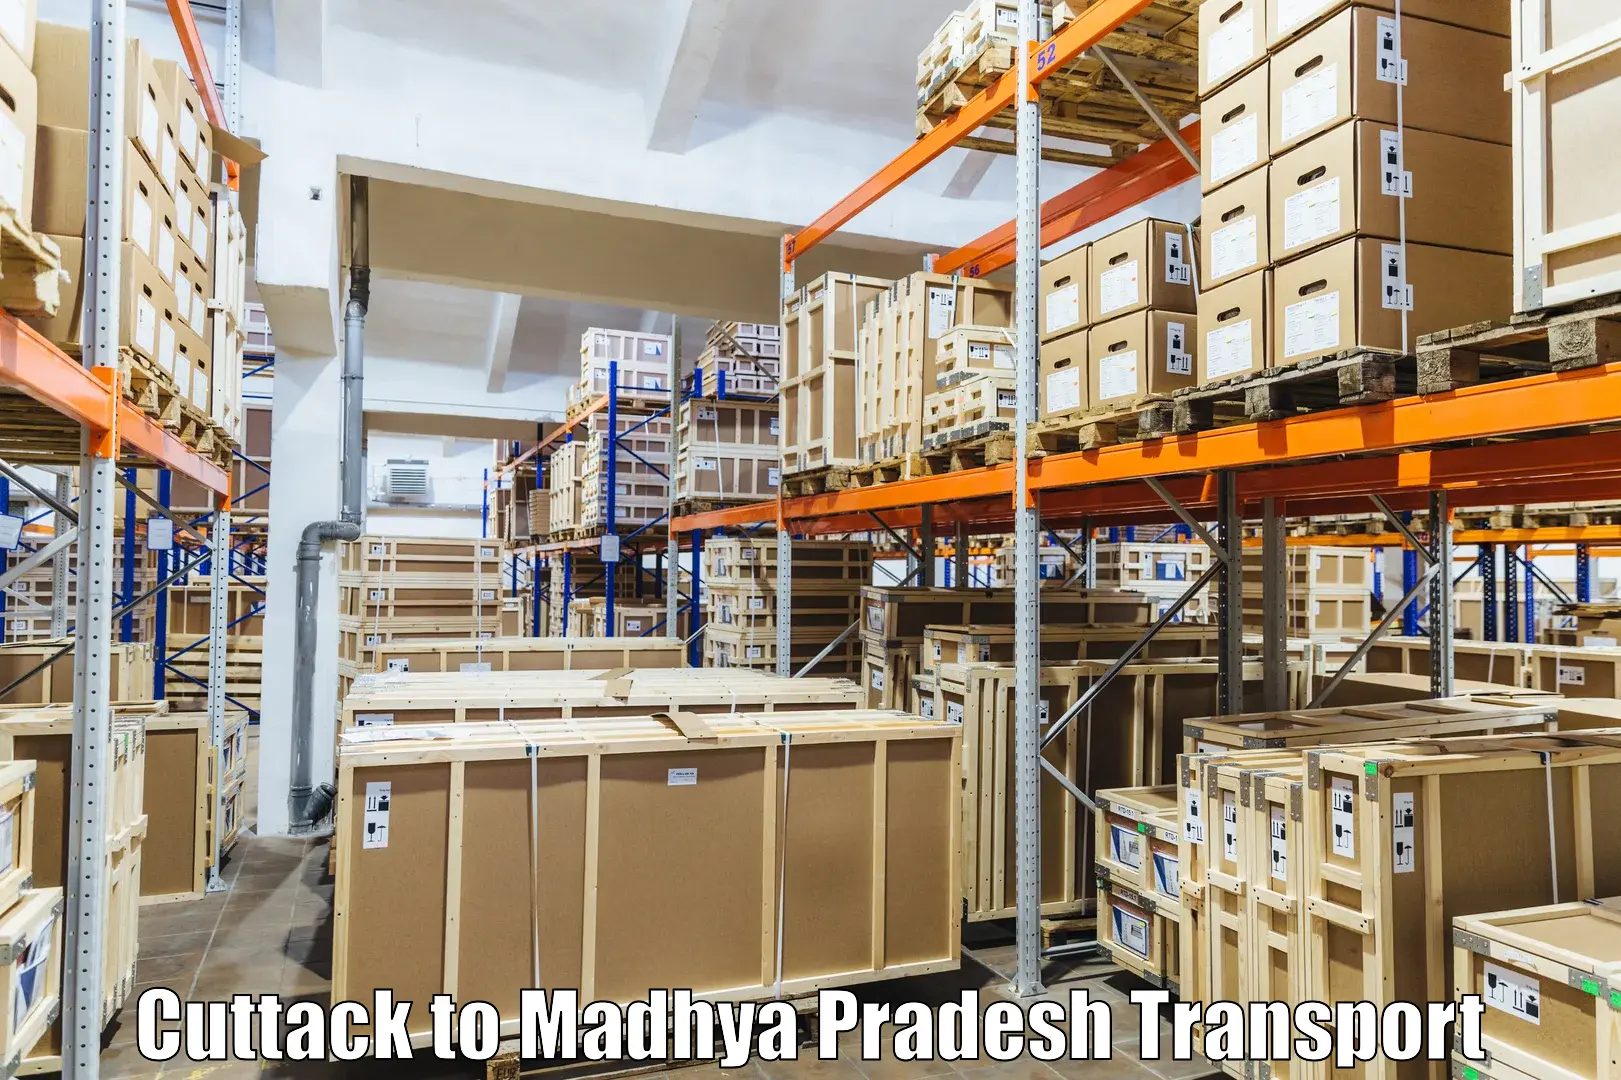 Daily parcel service transport in Cuttack to Madhya Pradesh